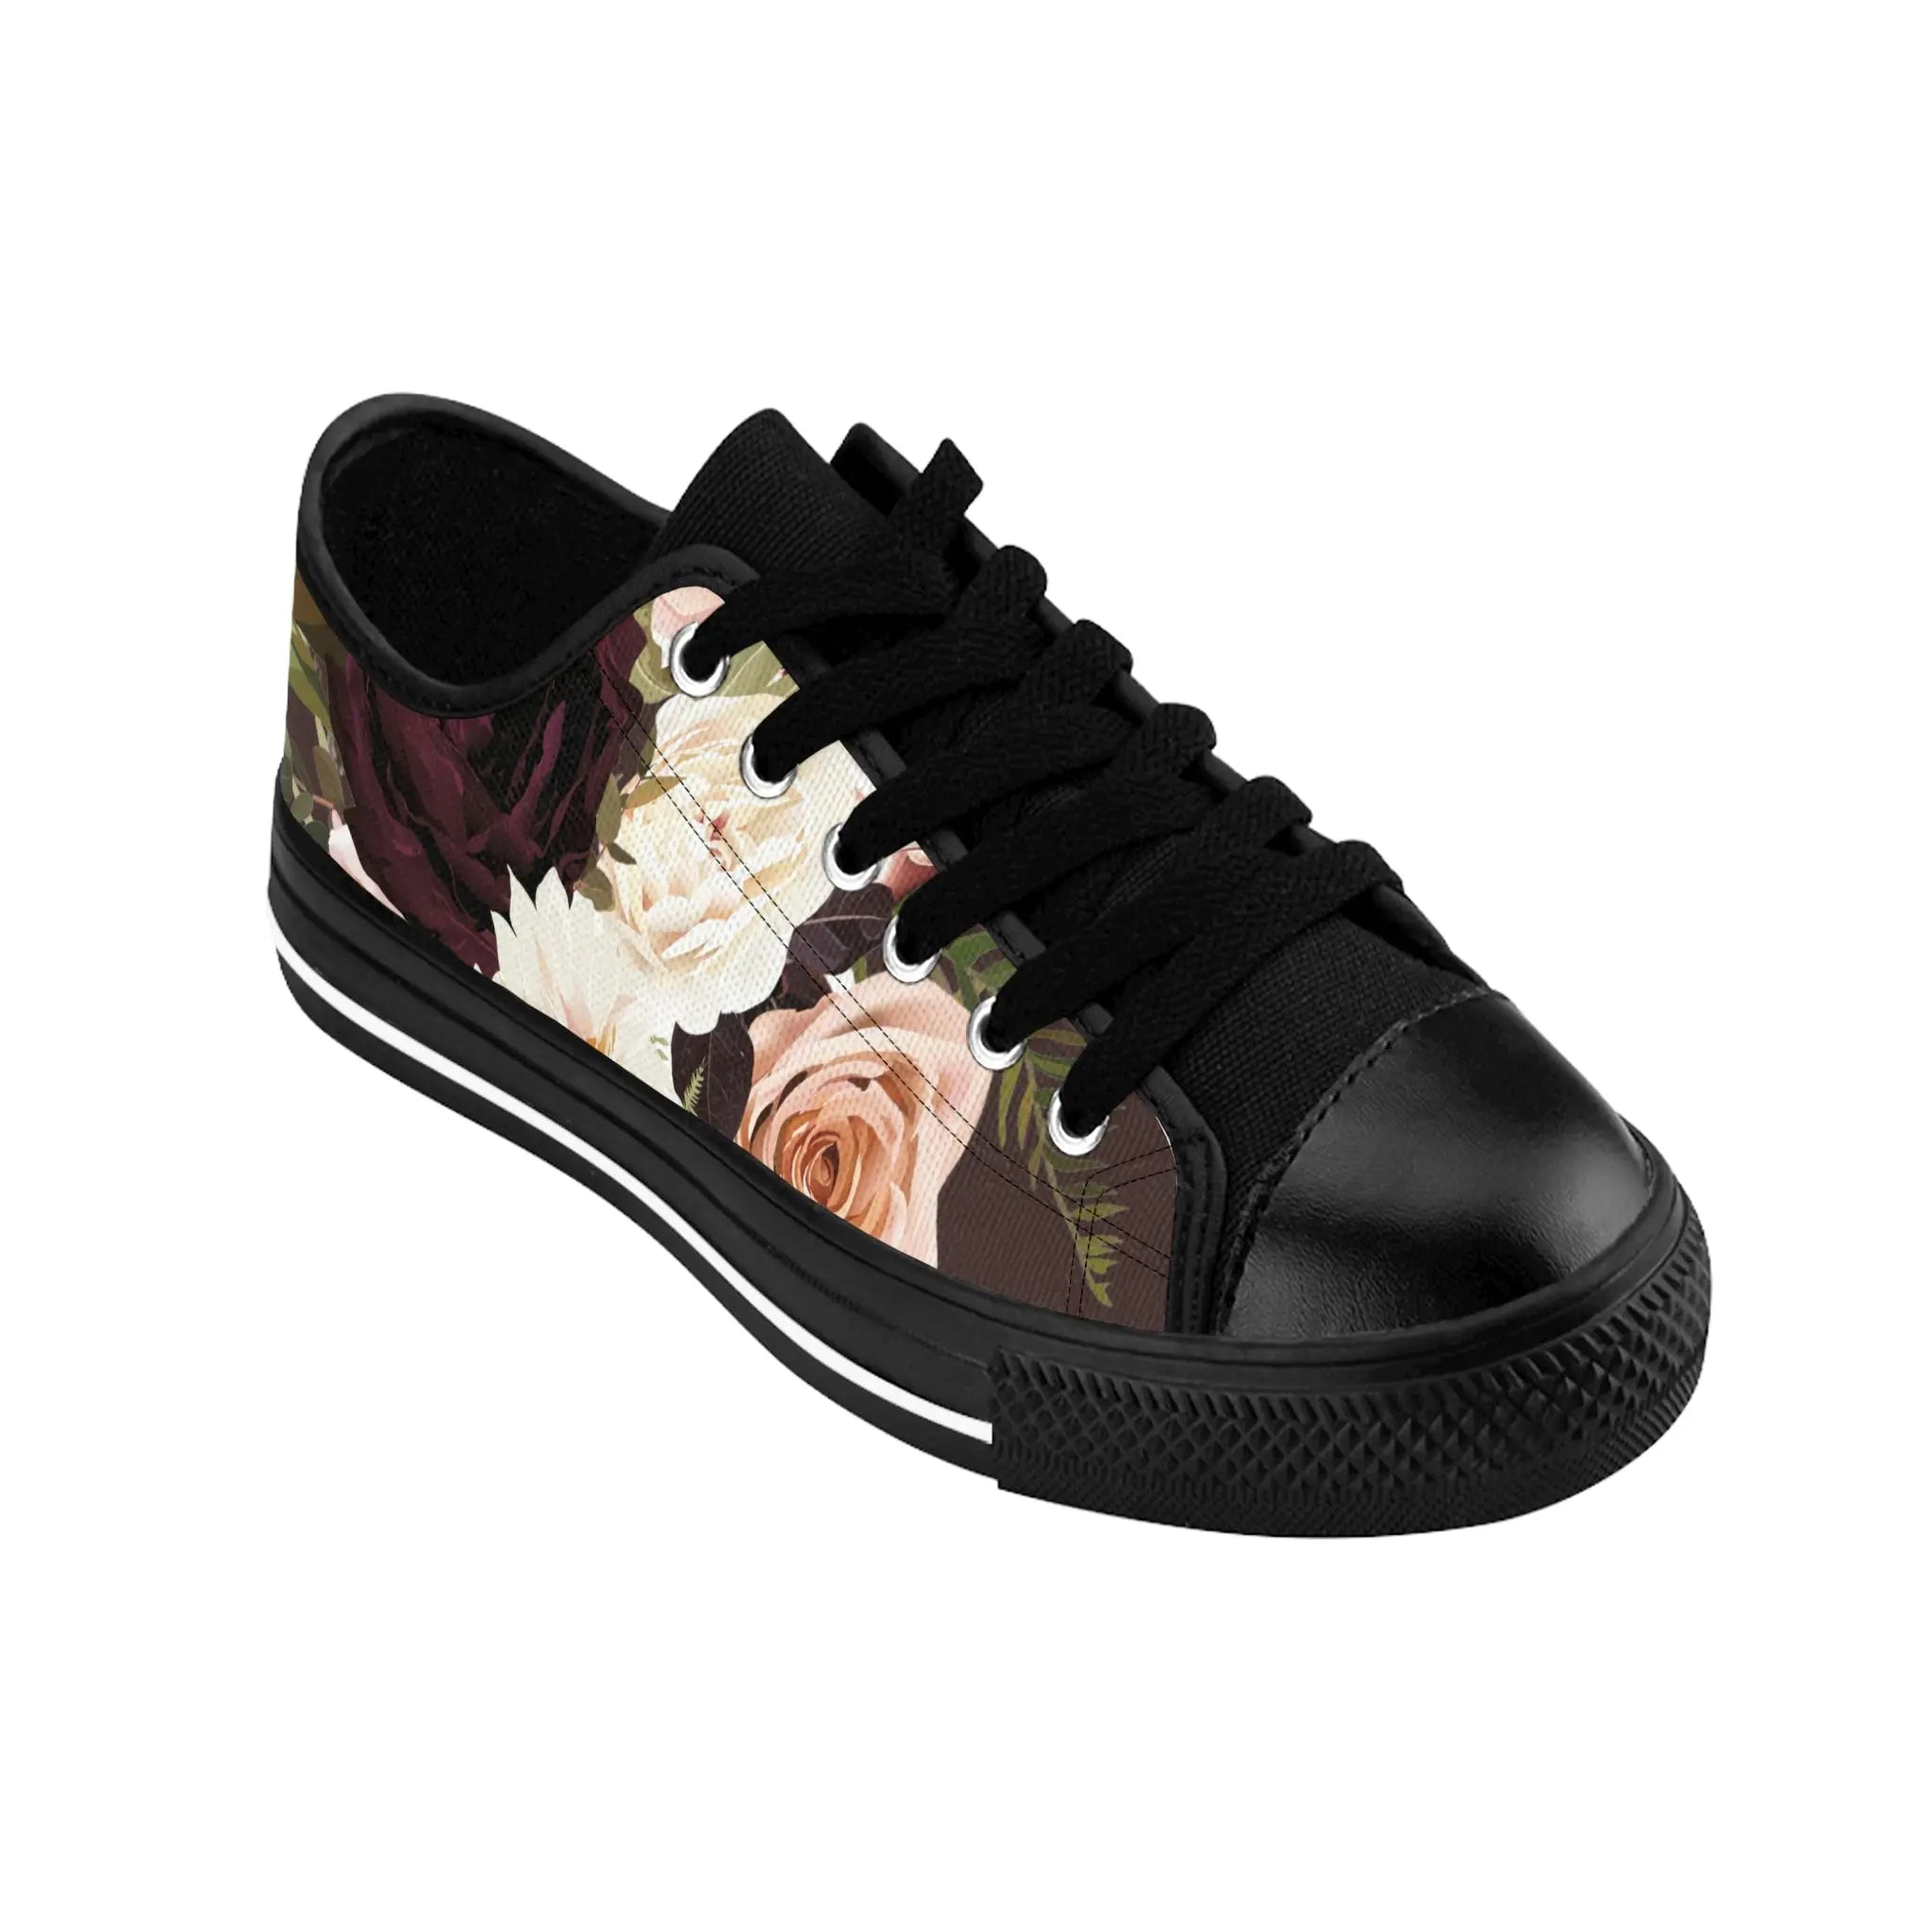  BOHO STAY WILD (Dark Bloom) Chocolate Brown Women's Low Top Canvas Shoes Shoes